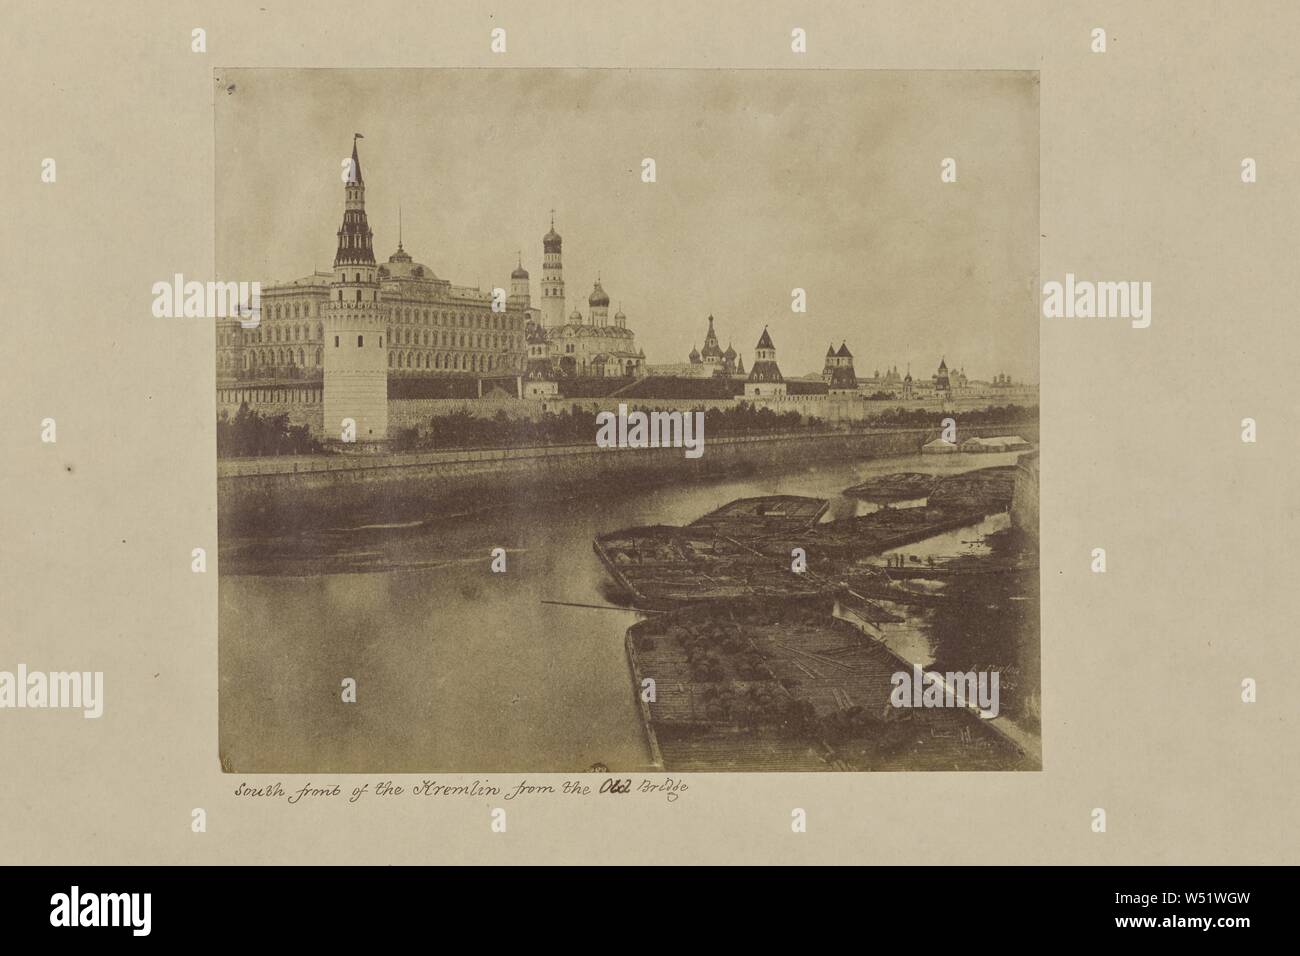 South Front of the Kremlin from the Old Bridge, Roger Fenton (English, 1819 - 1869), Moscow, Russia, September 1852, Salted paper print from a paper negative, 18.4 × 21.4 cm (7 1/4 × 8 7/16 in Stock Photo